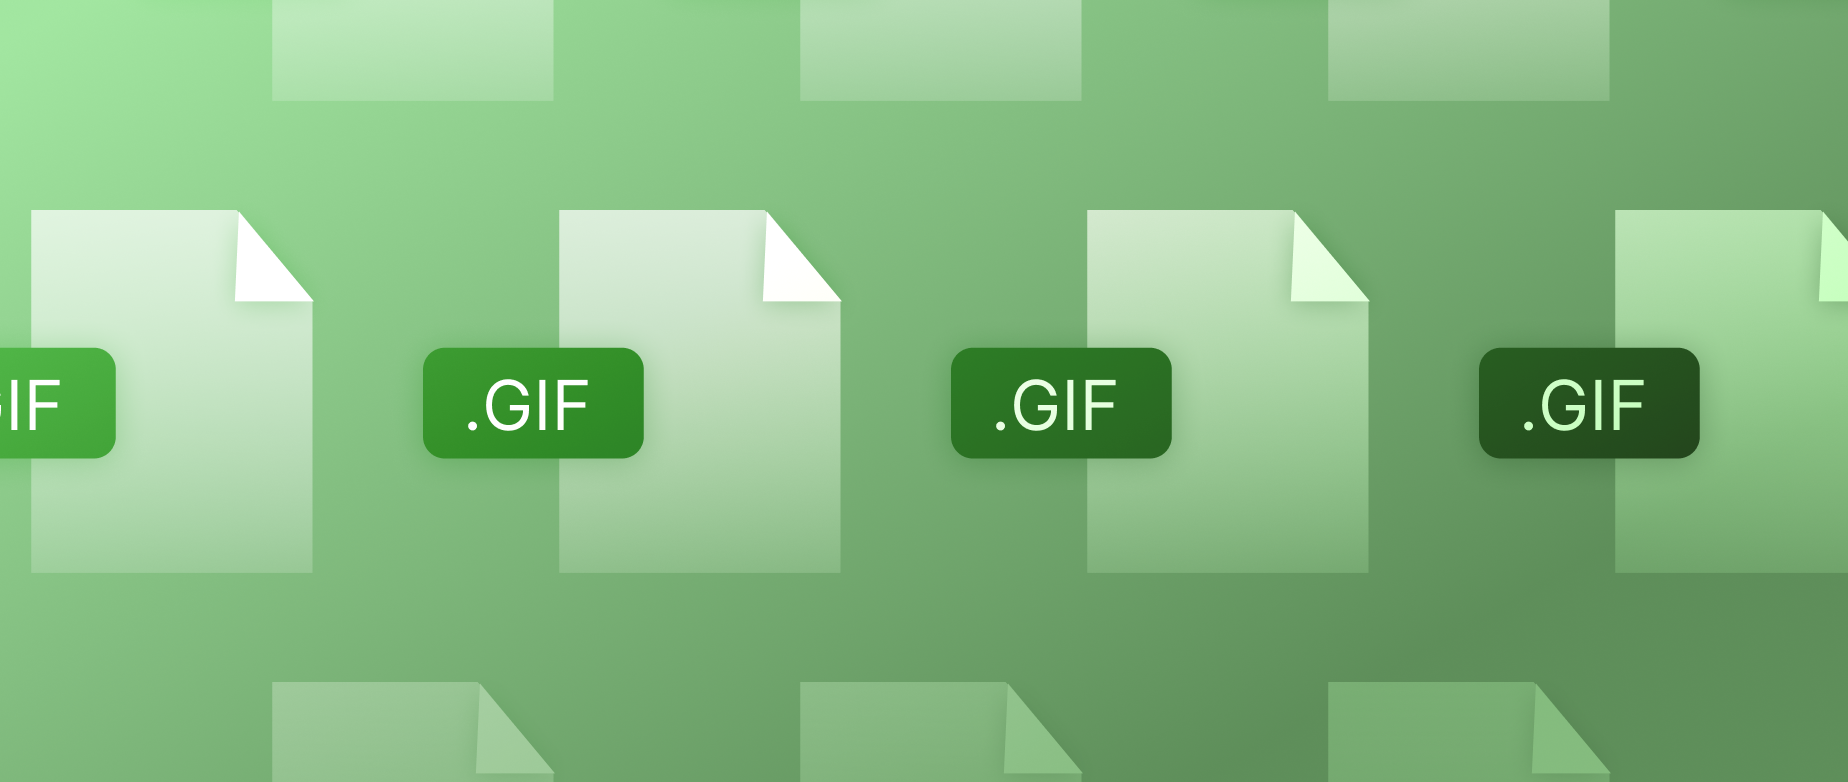 Rows of .GIF file icons on a green background.